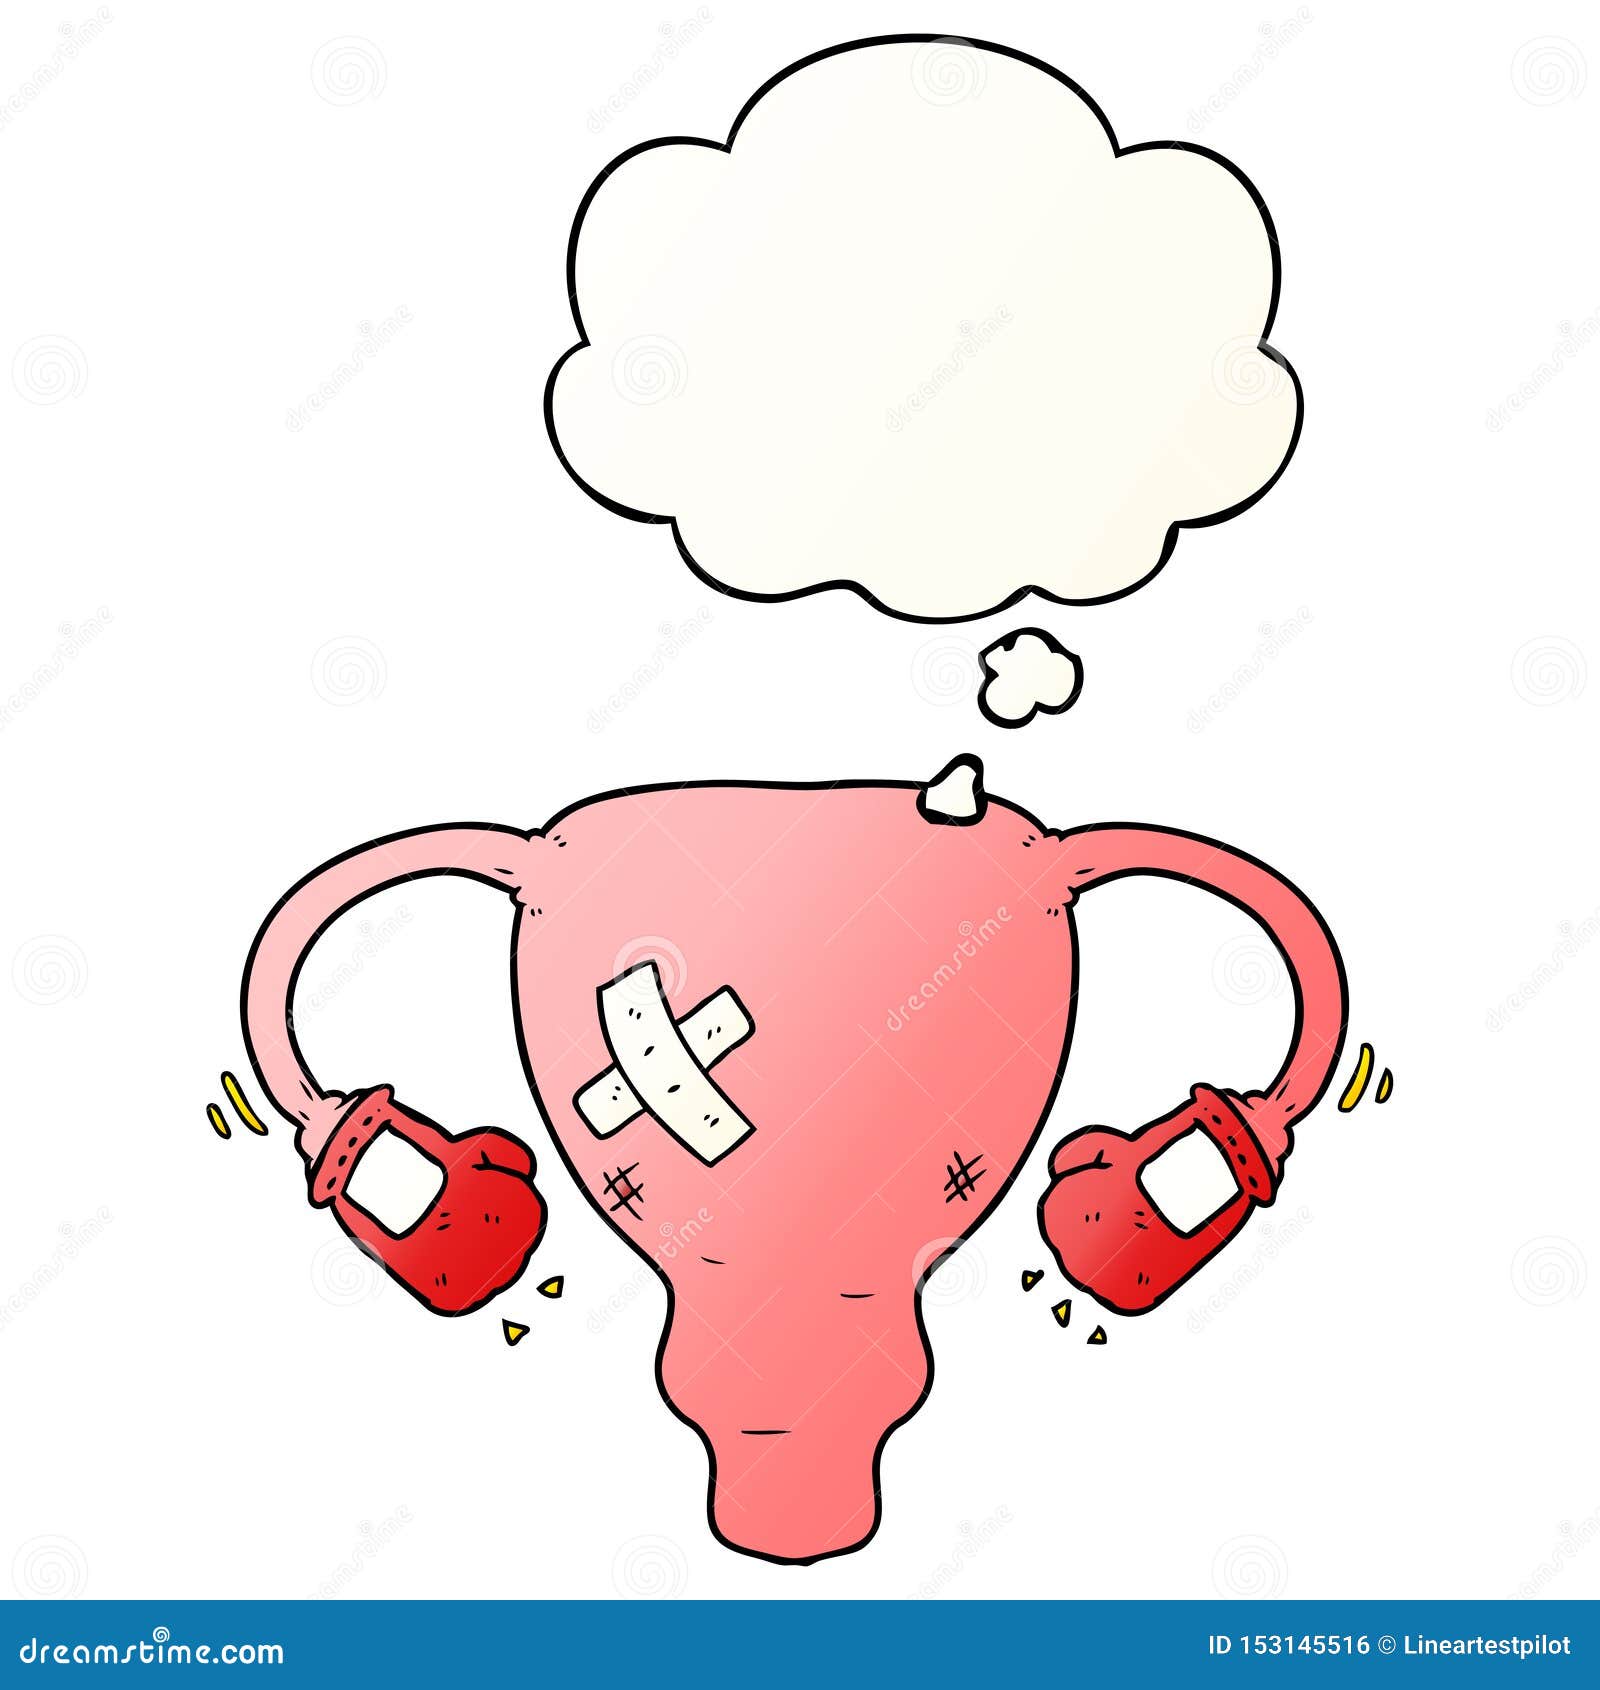 A Creative Cartoon Beat Up Uterus with Boxing Gloves and Thought Bubble ...